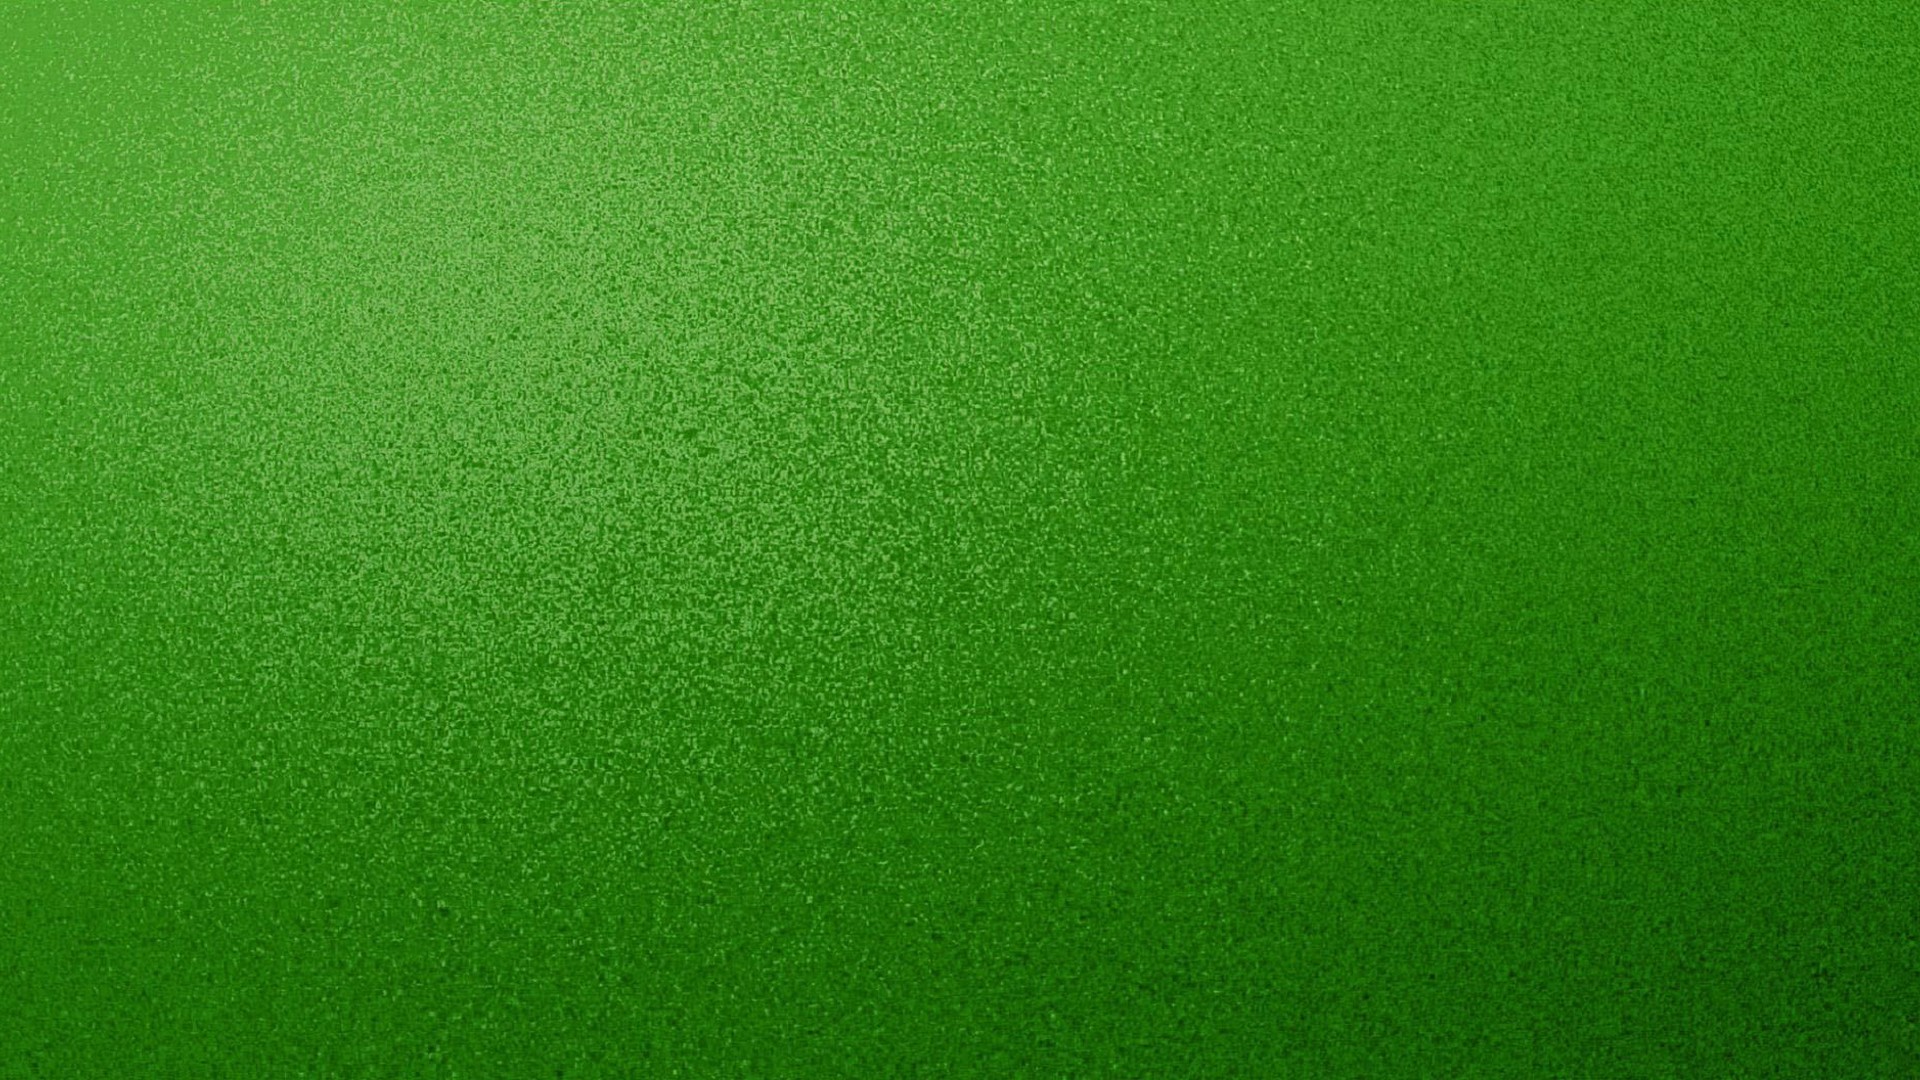 Green Wallpaper with resolution 1920X1080 pixel. You can use this wallpaper as background for your desktop Computer Screensavers, Android or iPhone smartphones